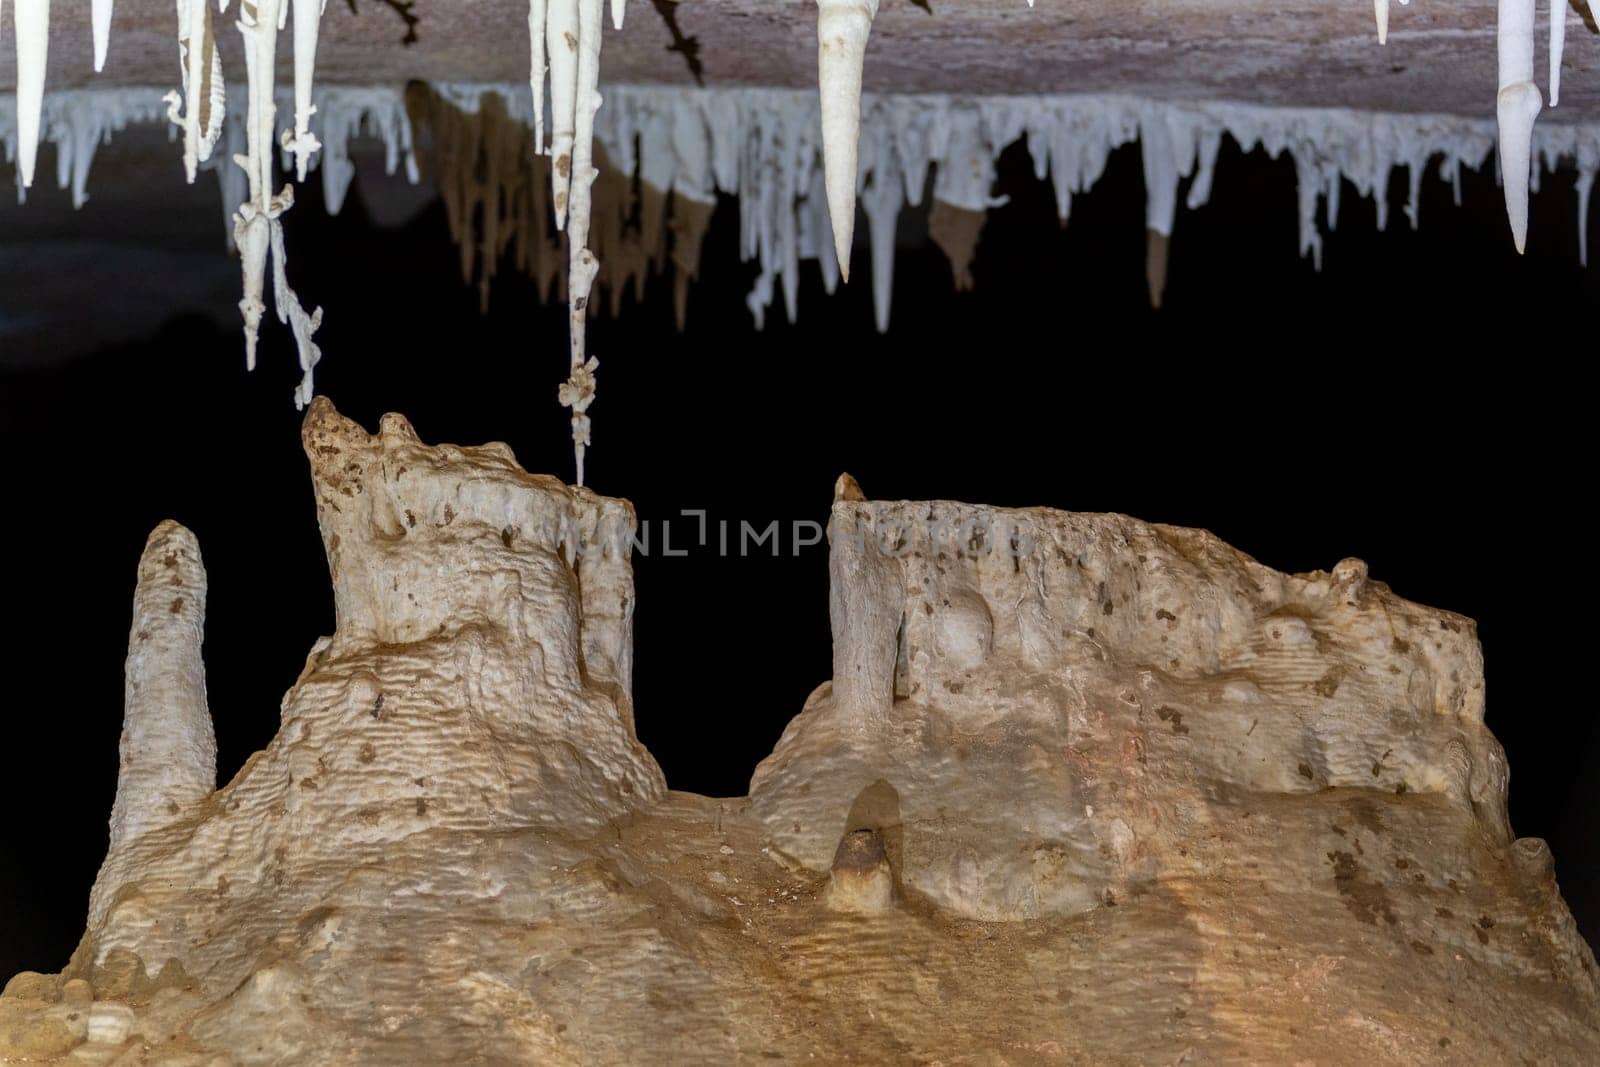 Mysterious Stalagmites and Stalactites in a Dark Cave by FerradalFCG